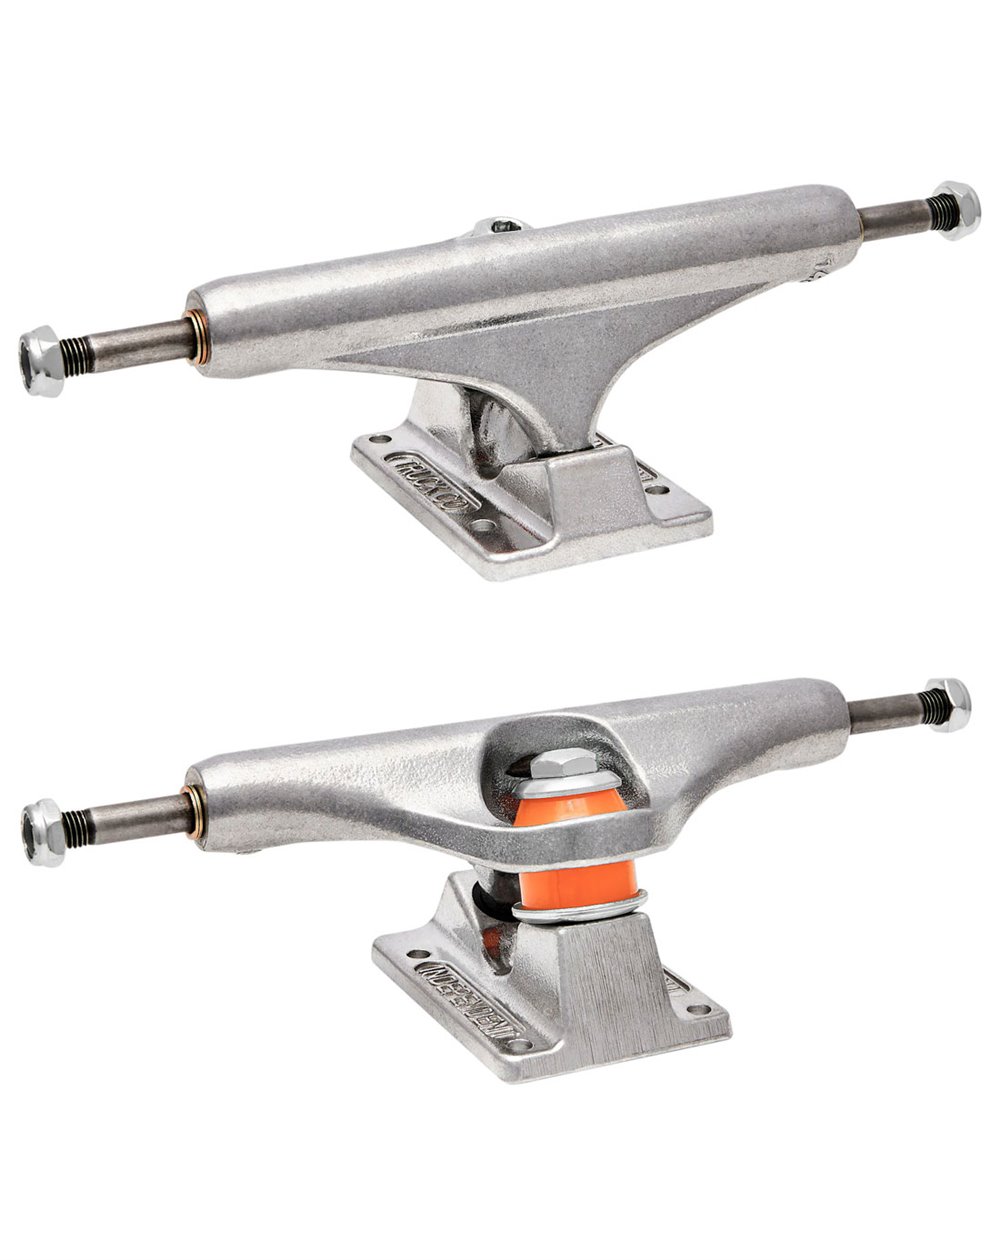 Independent MiD 144mm Skateboard Trucks pack of 2